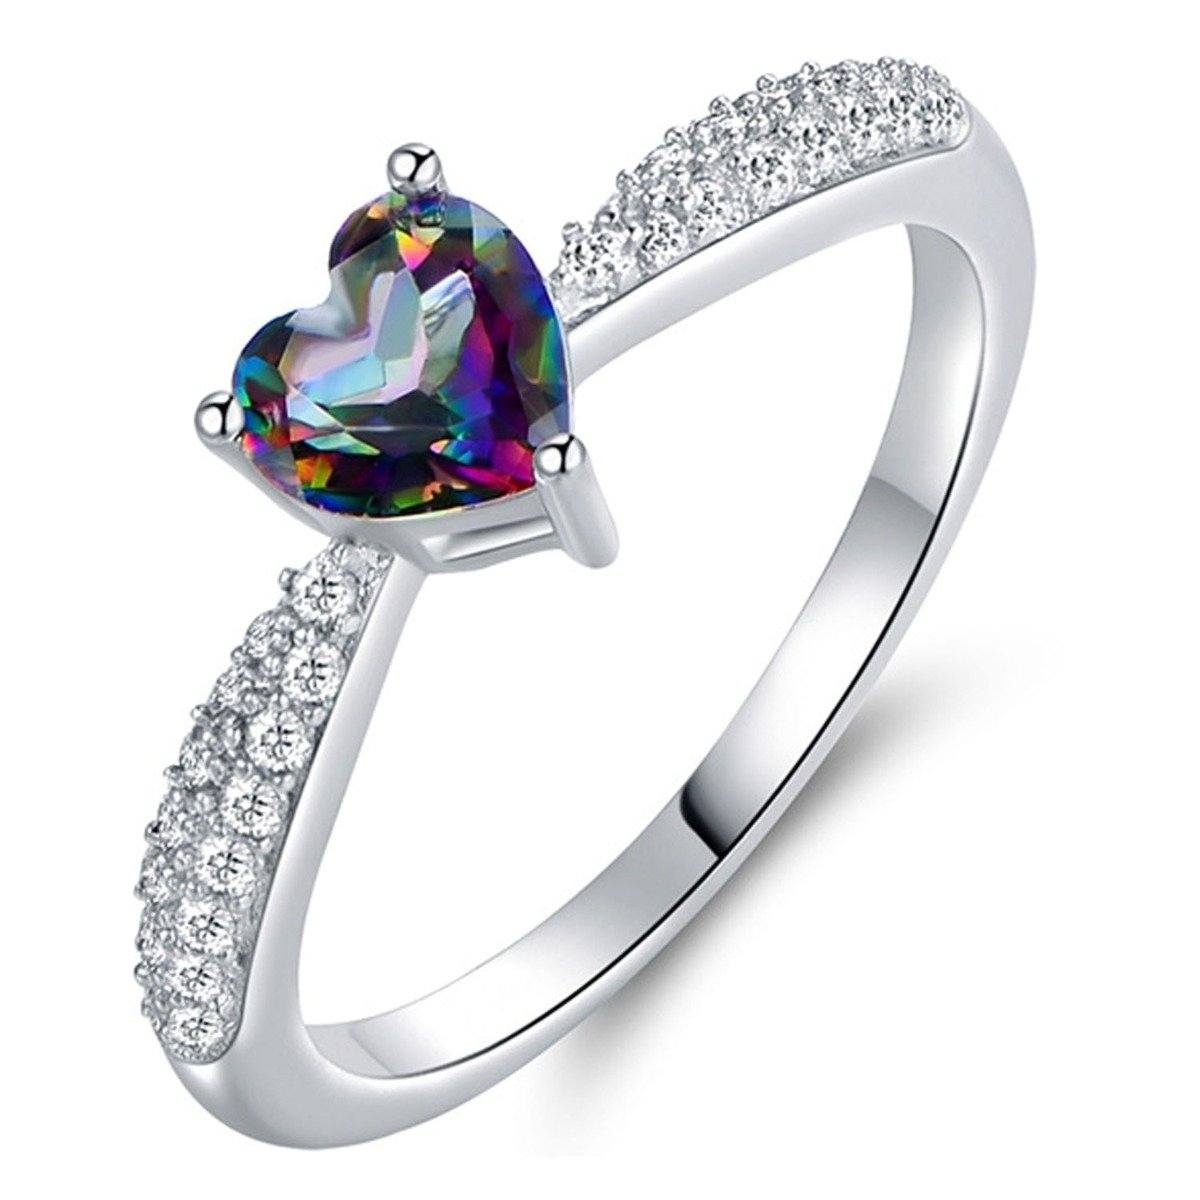 White Gold 3ct Heart-Cut Mystic Topaz Engagement Ring - Assorted Sizes / 5